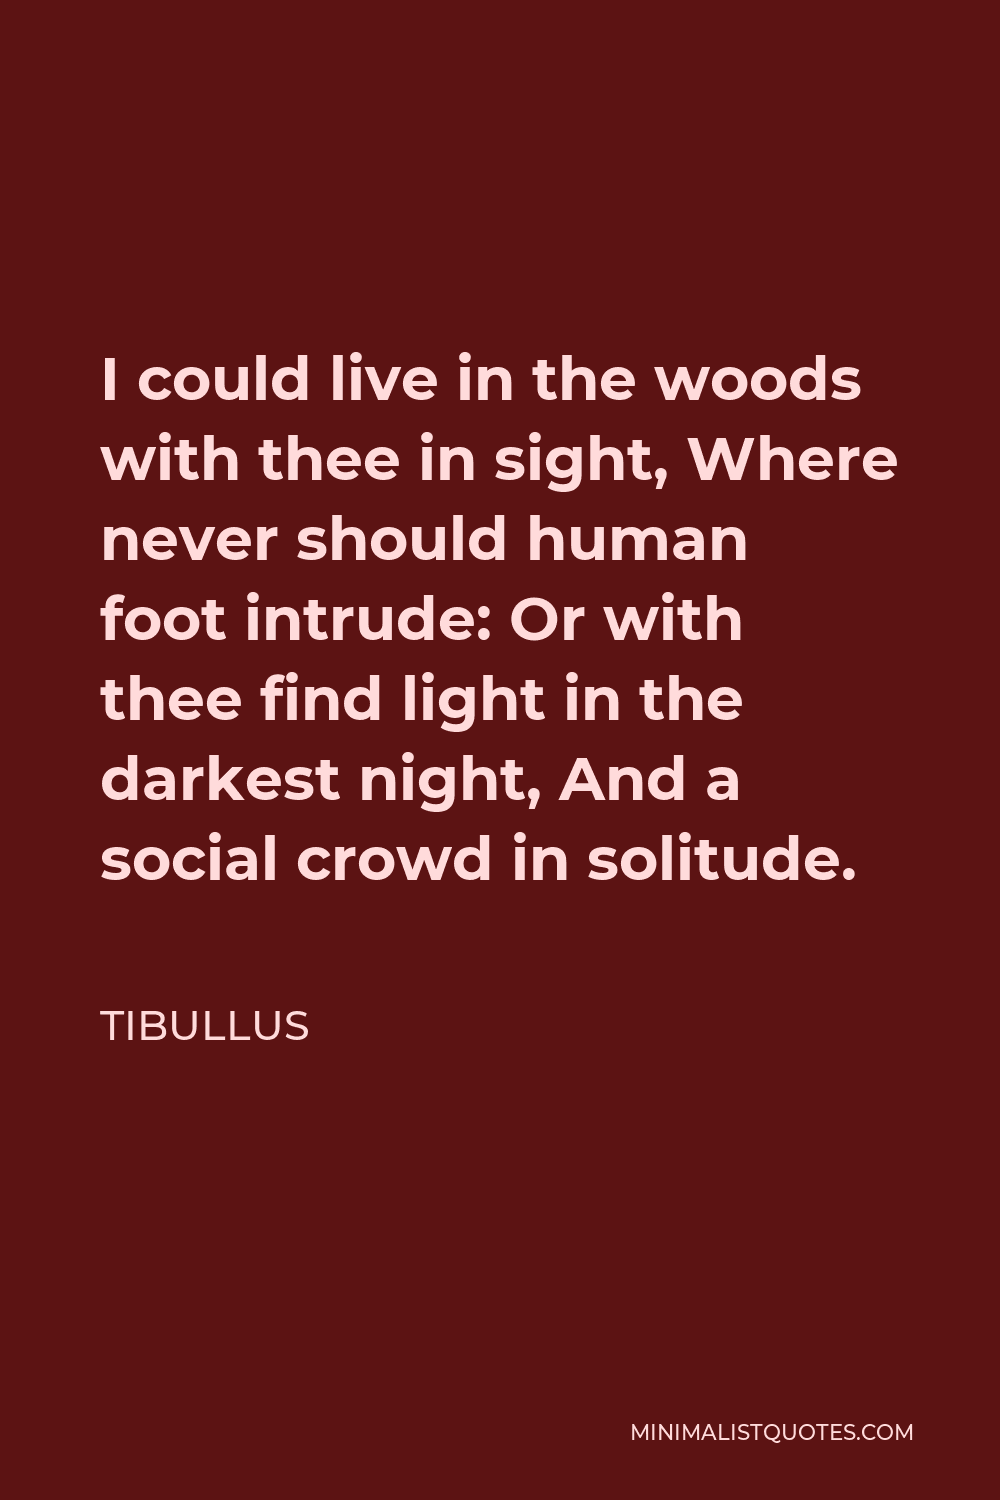 Tibullus Quote - I could live in the woods with thee in sight, Where never should human foot intrude: Or with thee find light in the darkest night, And a social crowd in solitude.